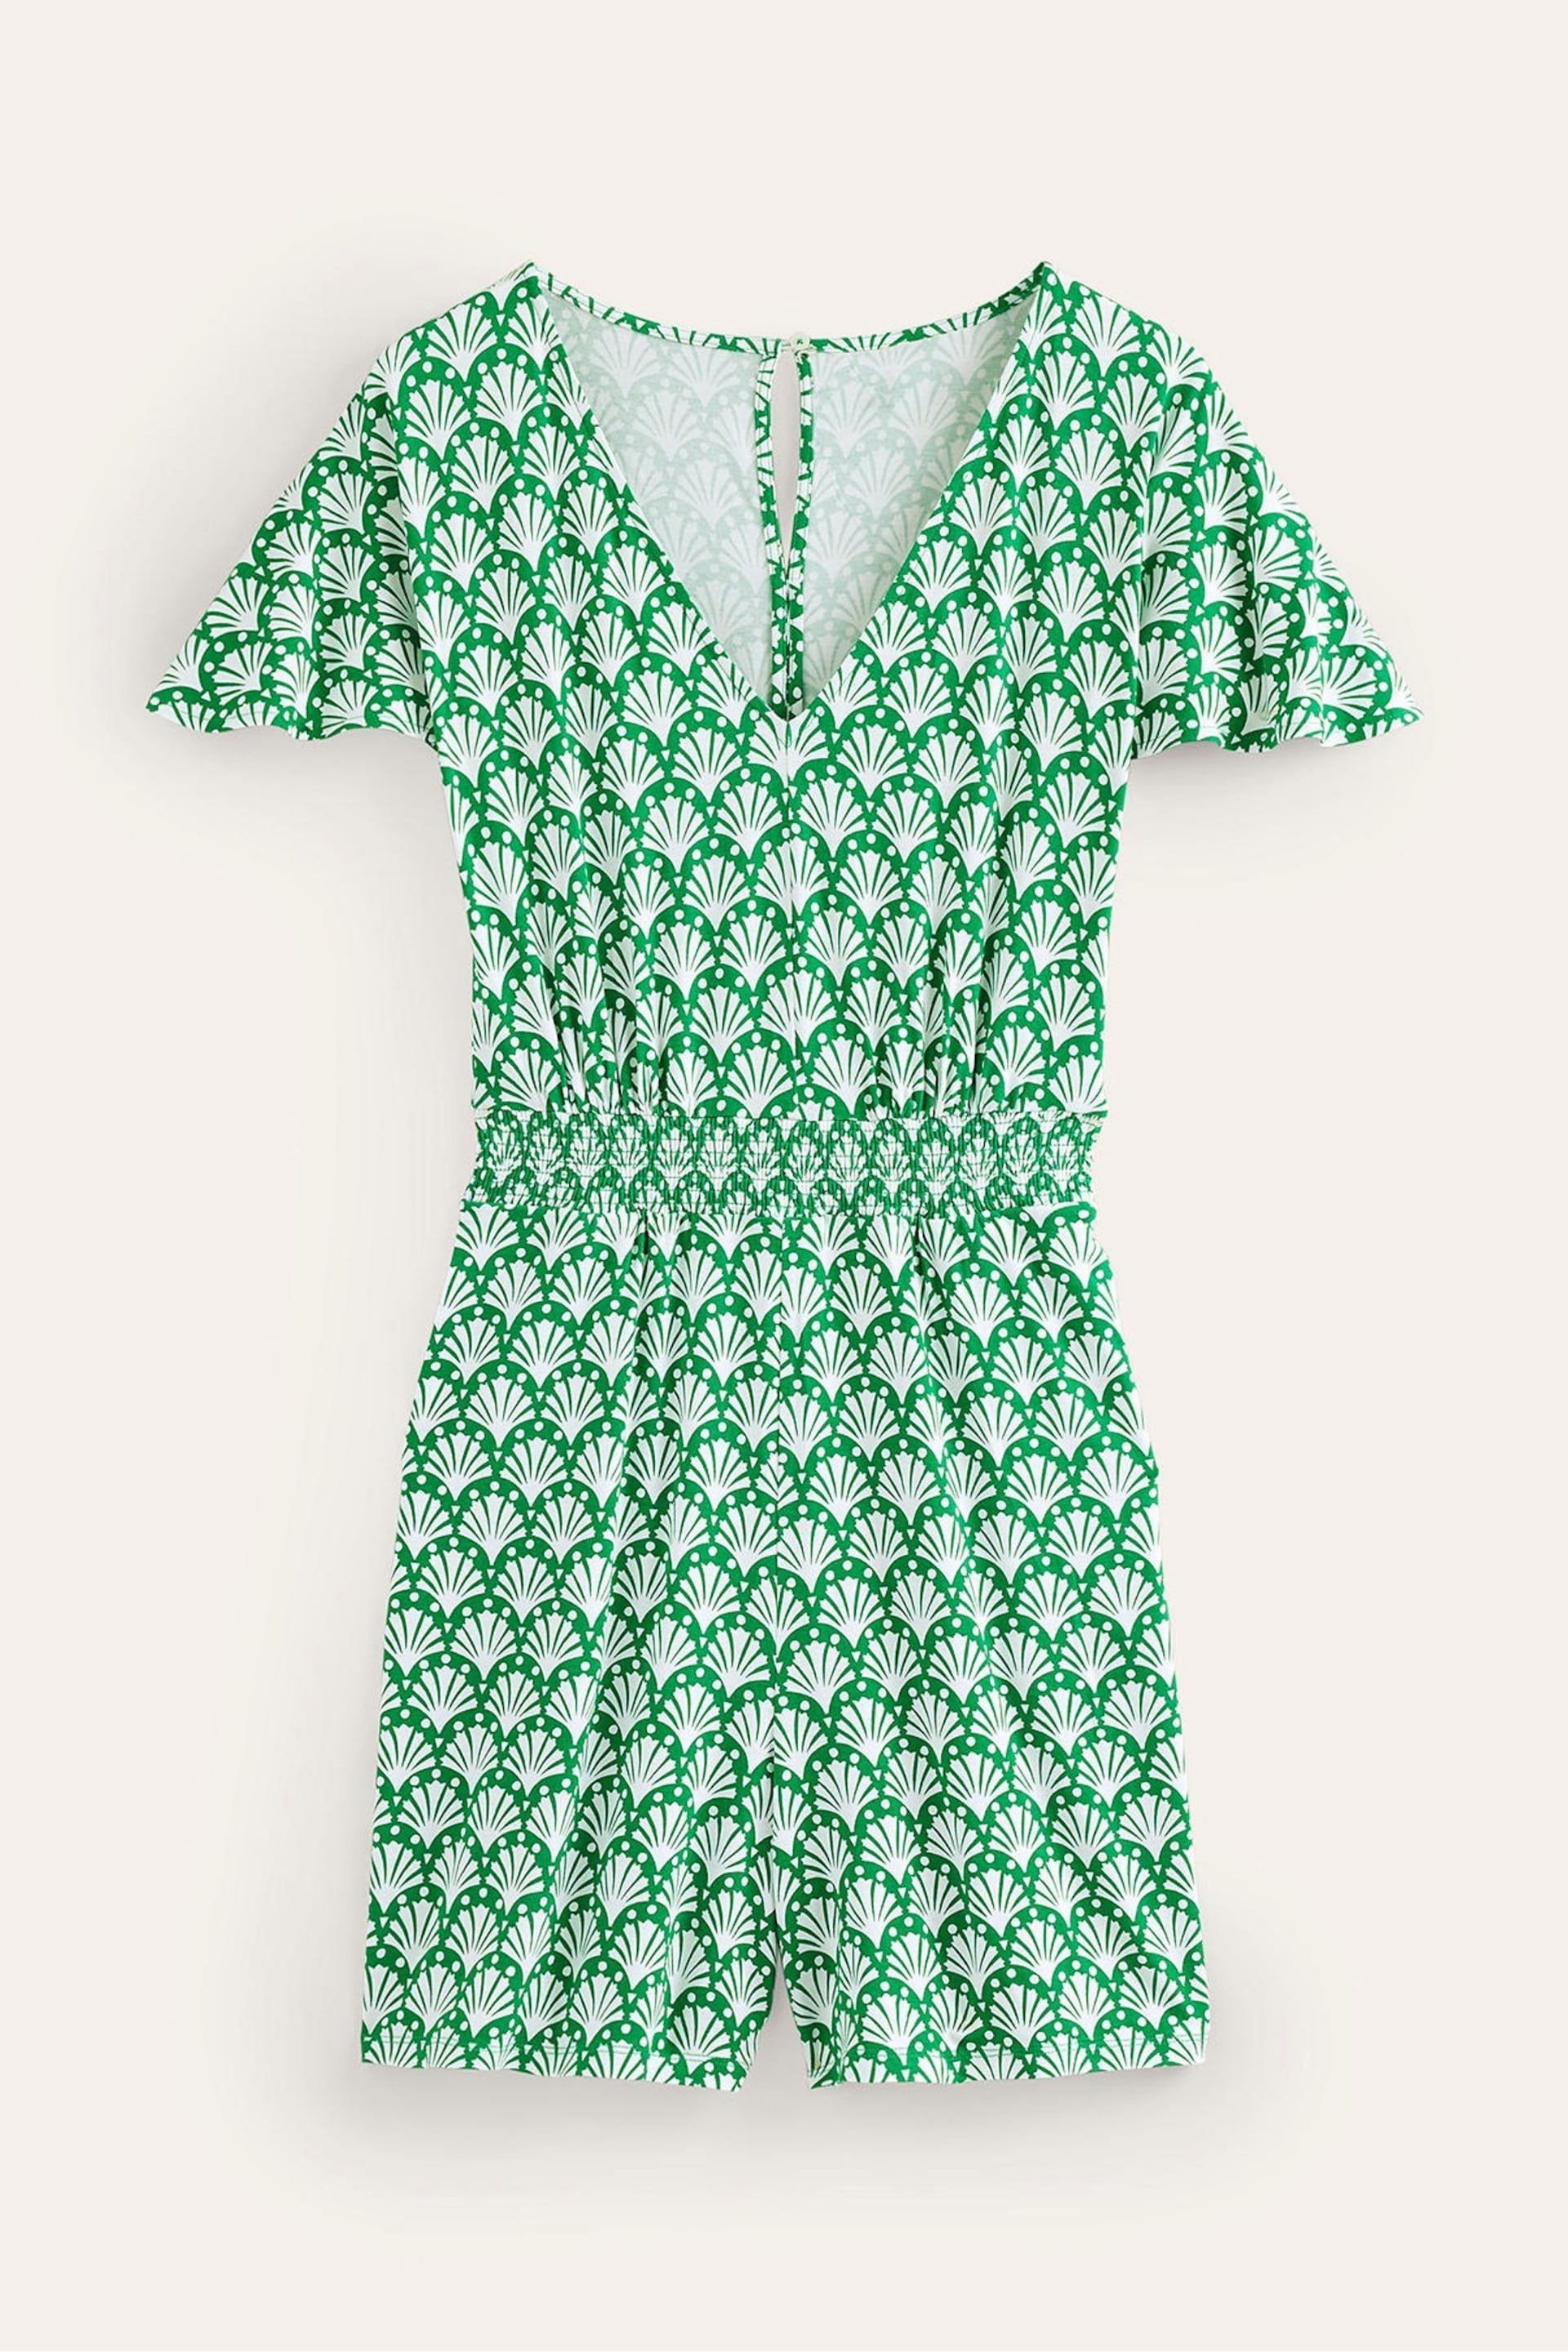 Boden Green Smocked Jersey Playsuit - Image 5 of 5